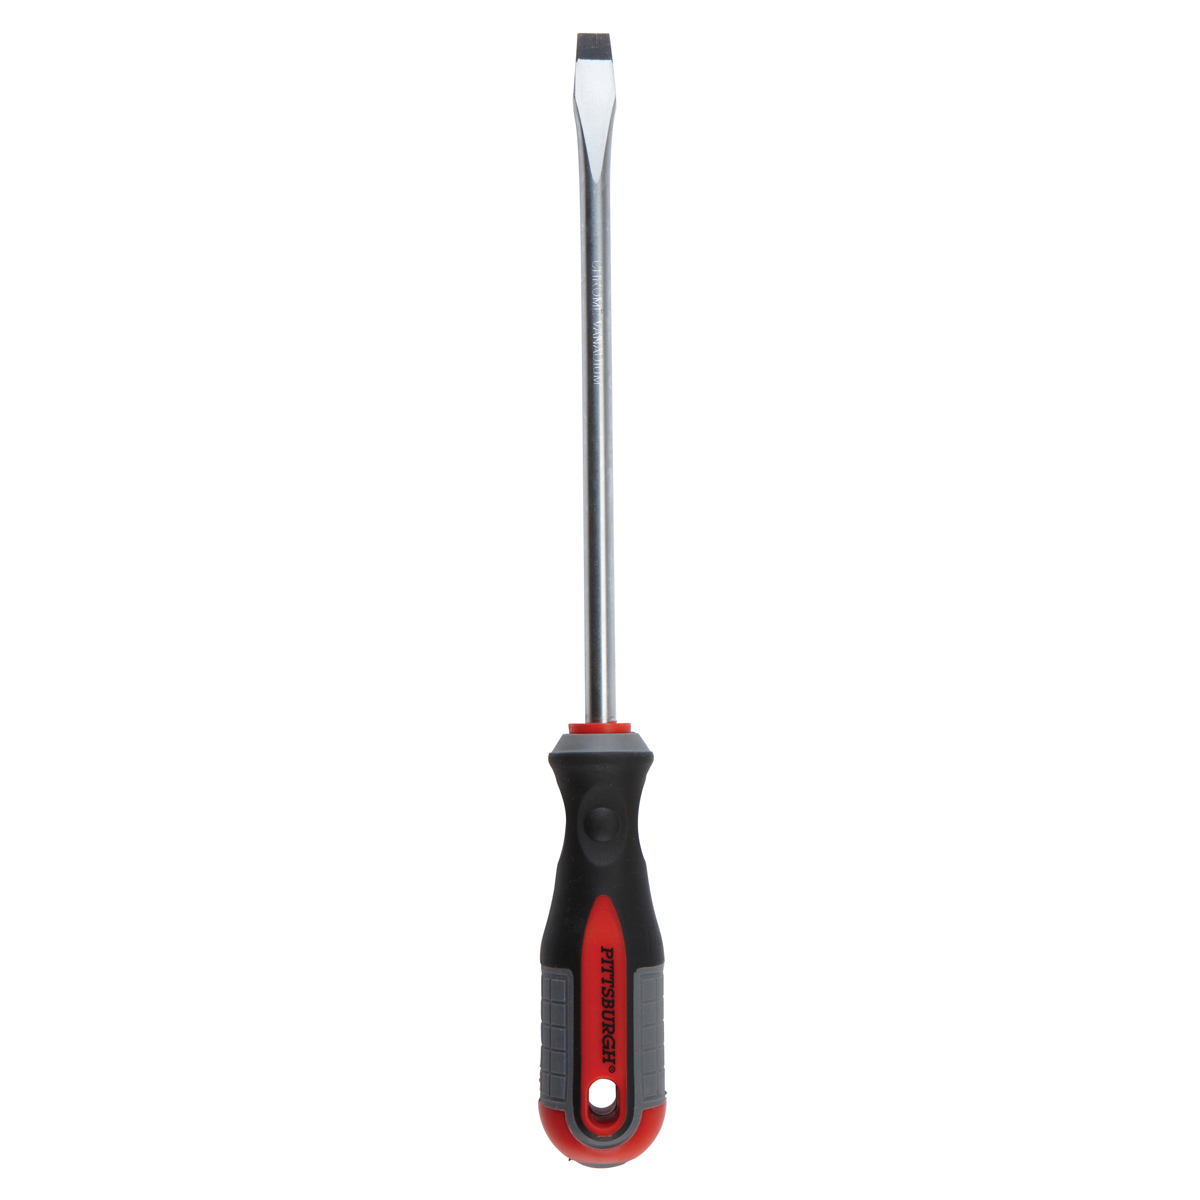 PITTSBURGH 3/8 in. x 8 in. Slotted Screwdriver - Item 94619 / 41264